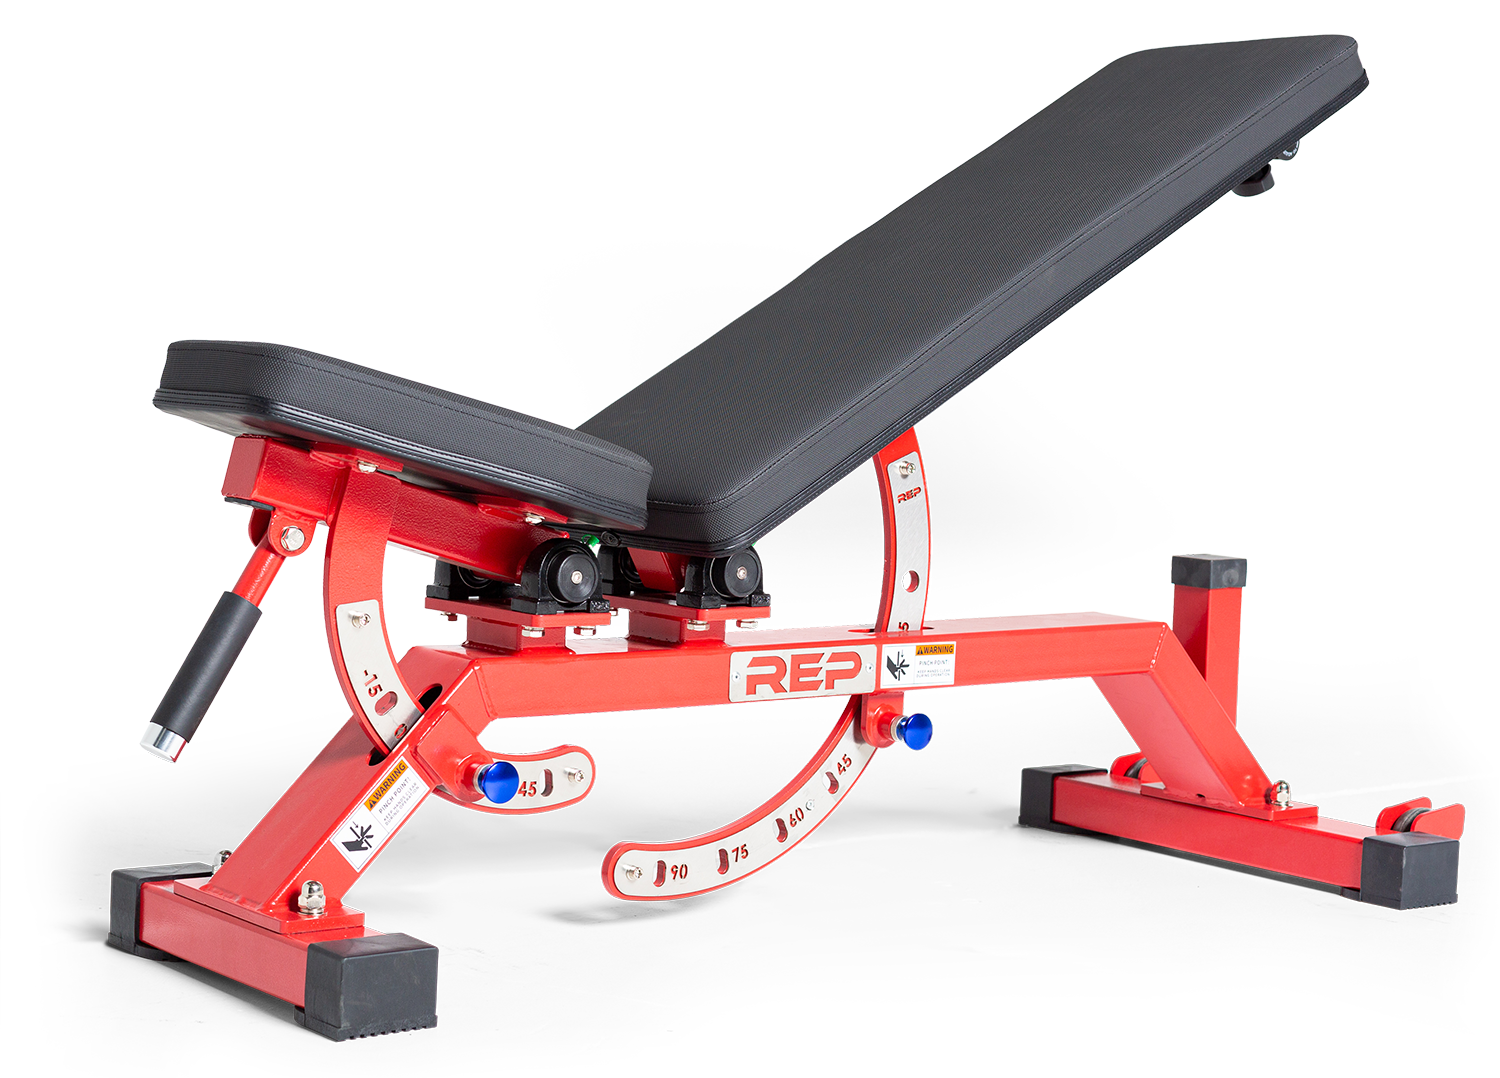 AB-5100 Adjustable Weight Bench - Rot